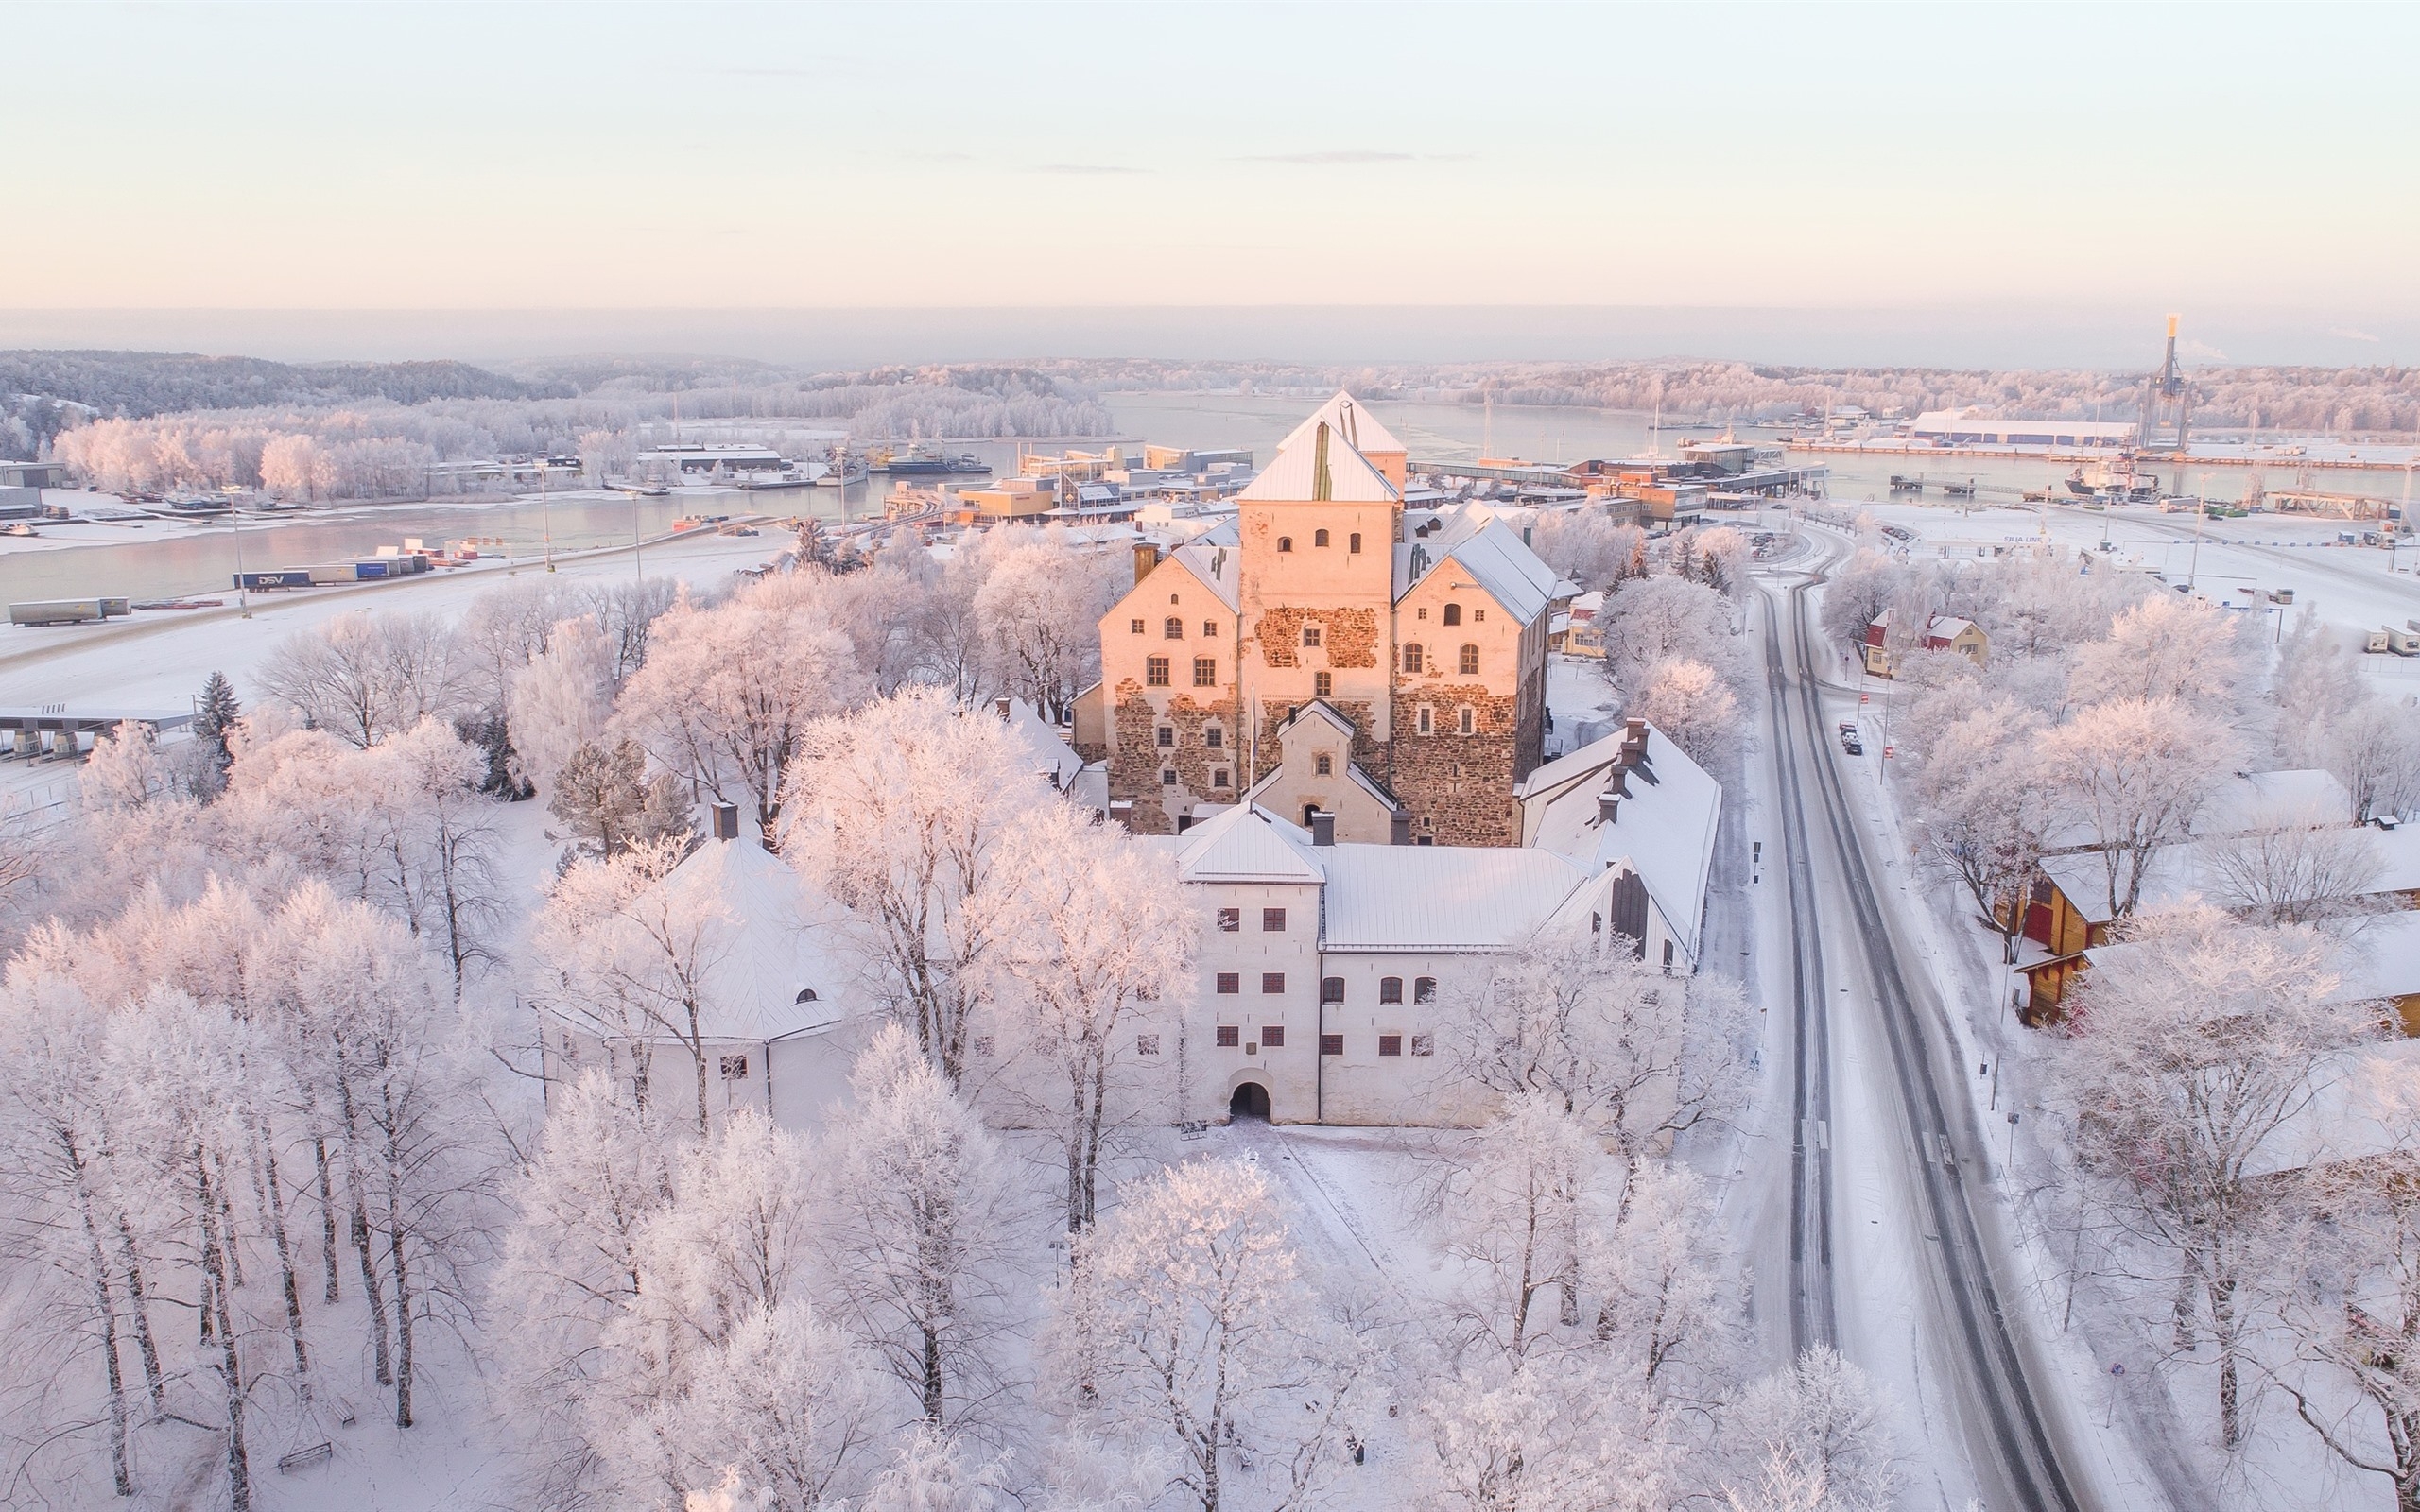 A frosty evening in Finland